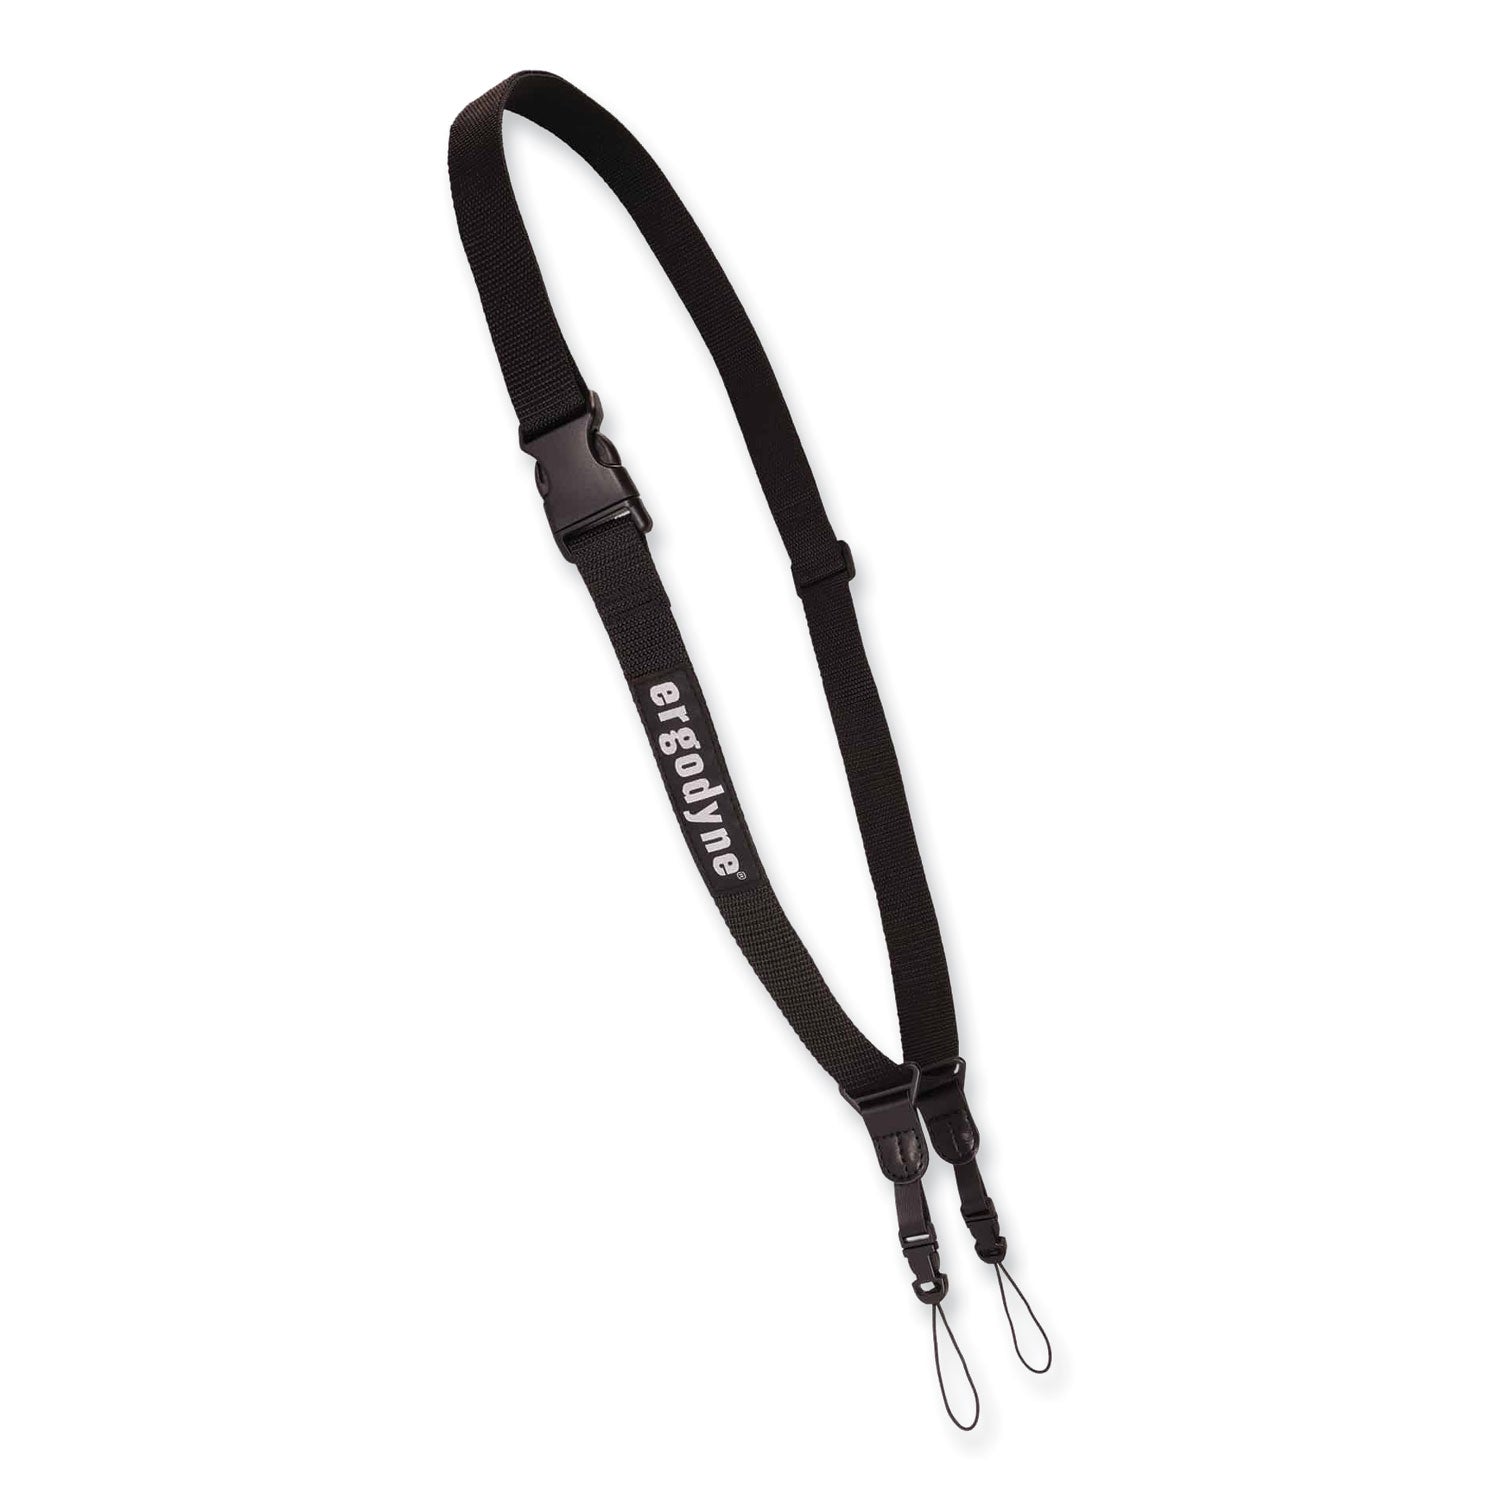 squids-3134-barcode-scanner-lanyard-sling-28-to-66-long-black-ships-in-1-3-business-days_ego19166 - 1